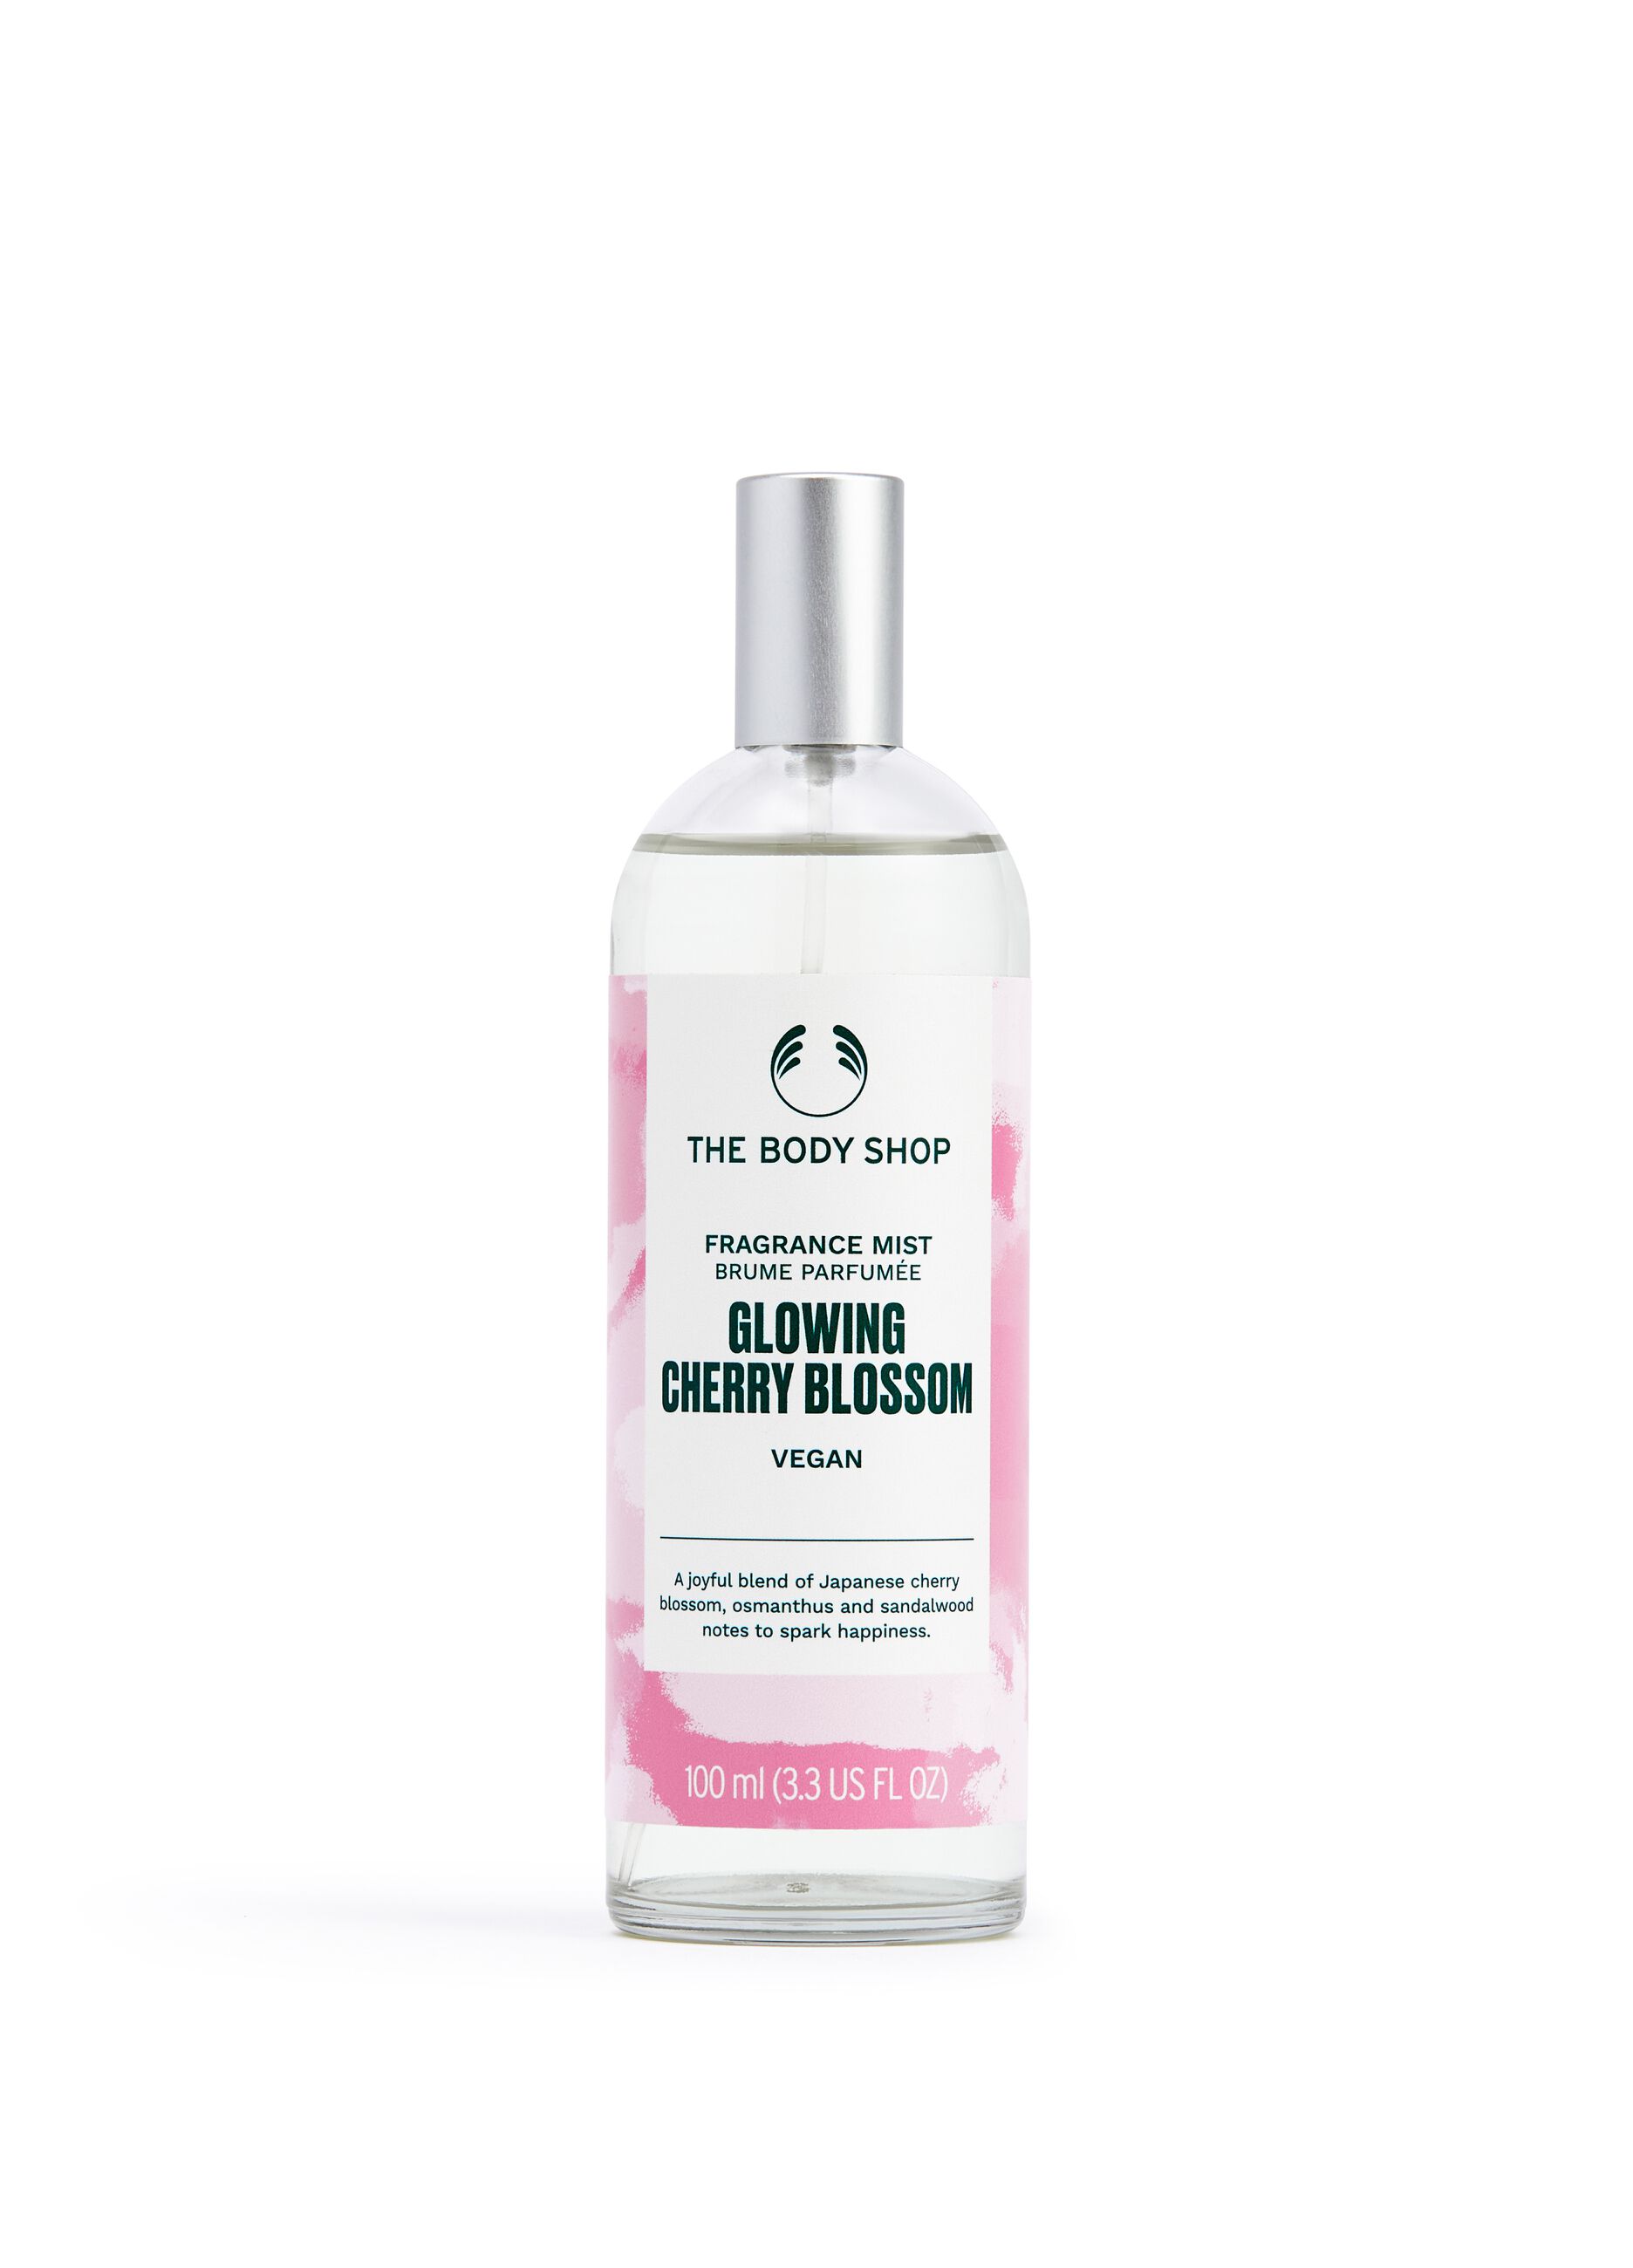 The Body Shop Glowing Cherry Blossom scented spray 100ml